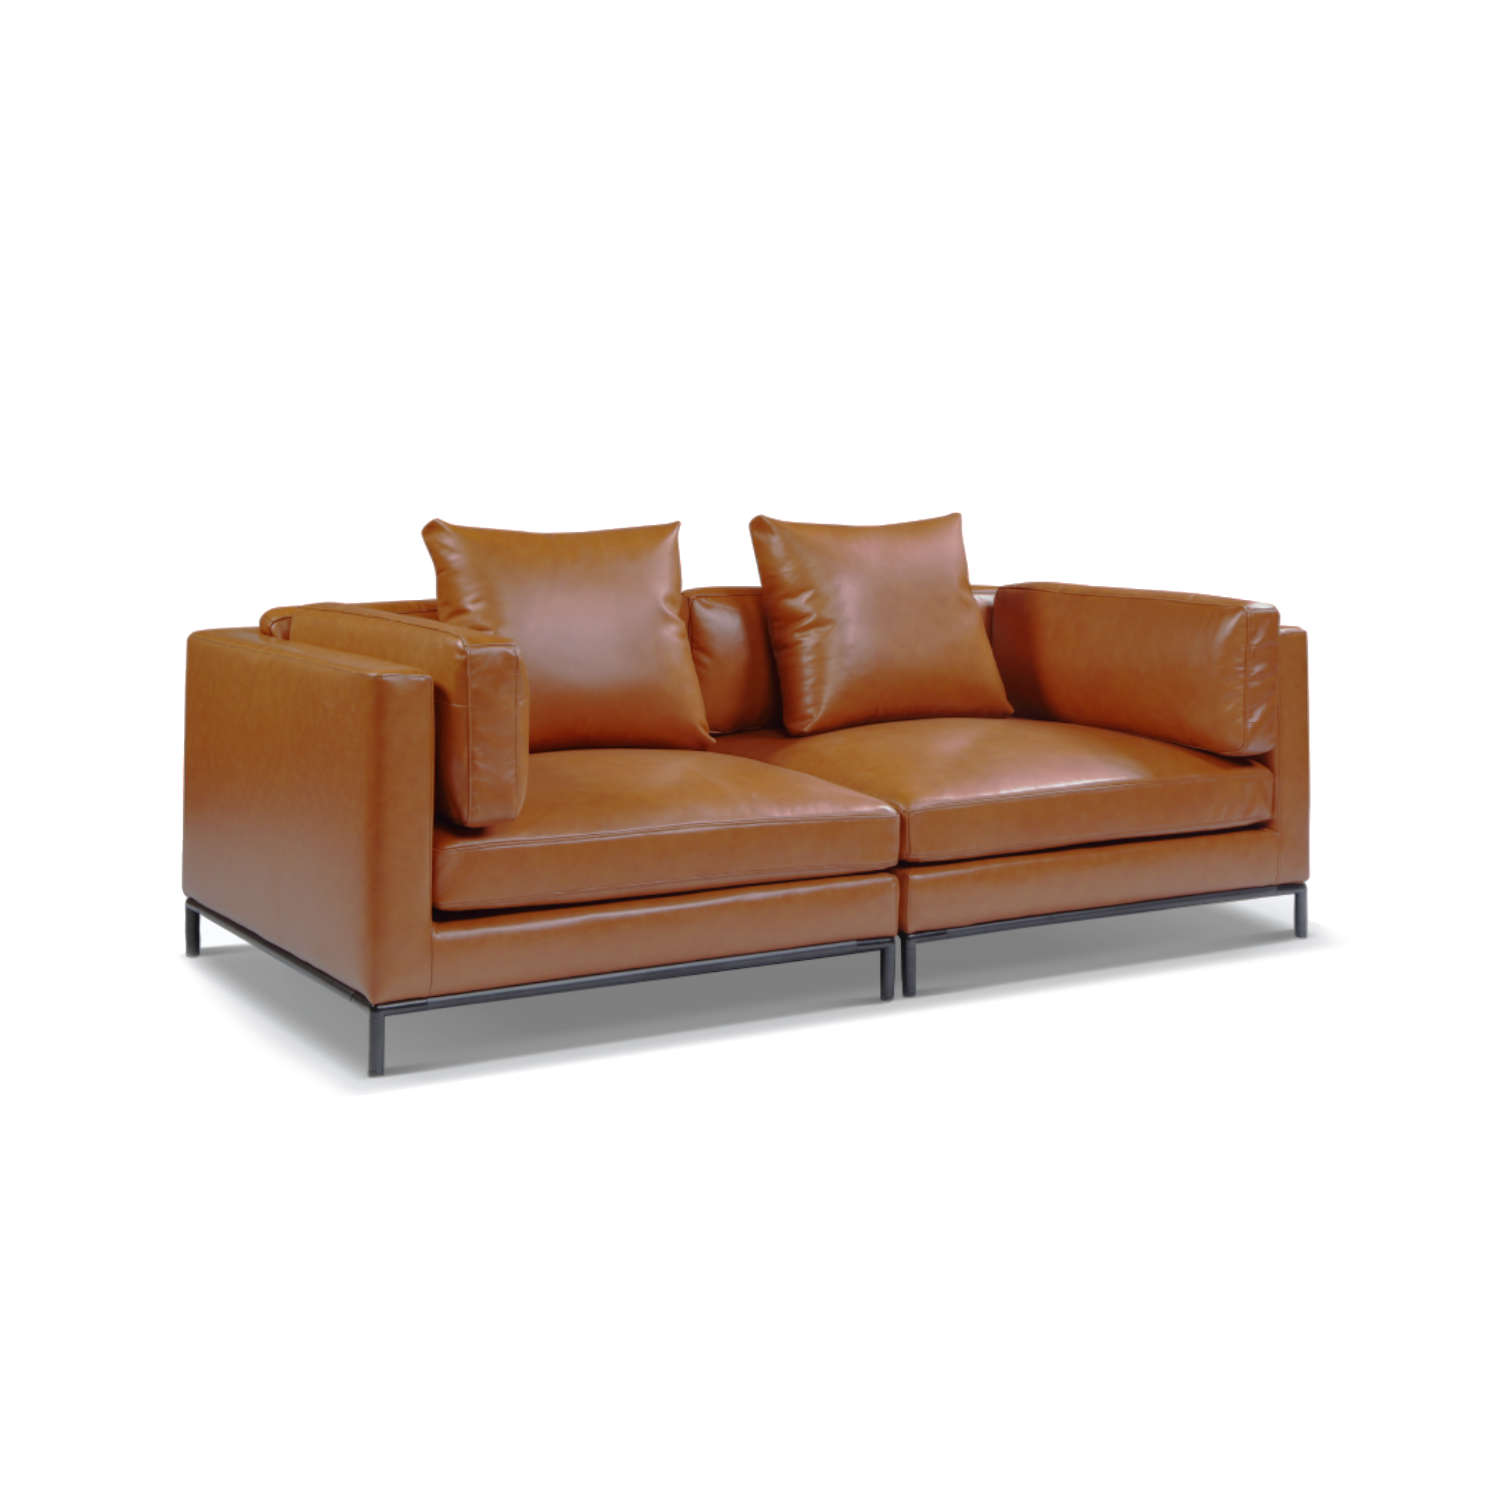 Migliore Modern Love Seat Leather Sofa, Mid Century Modern Leather Sectional